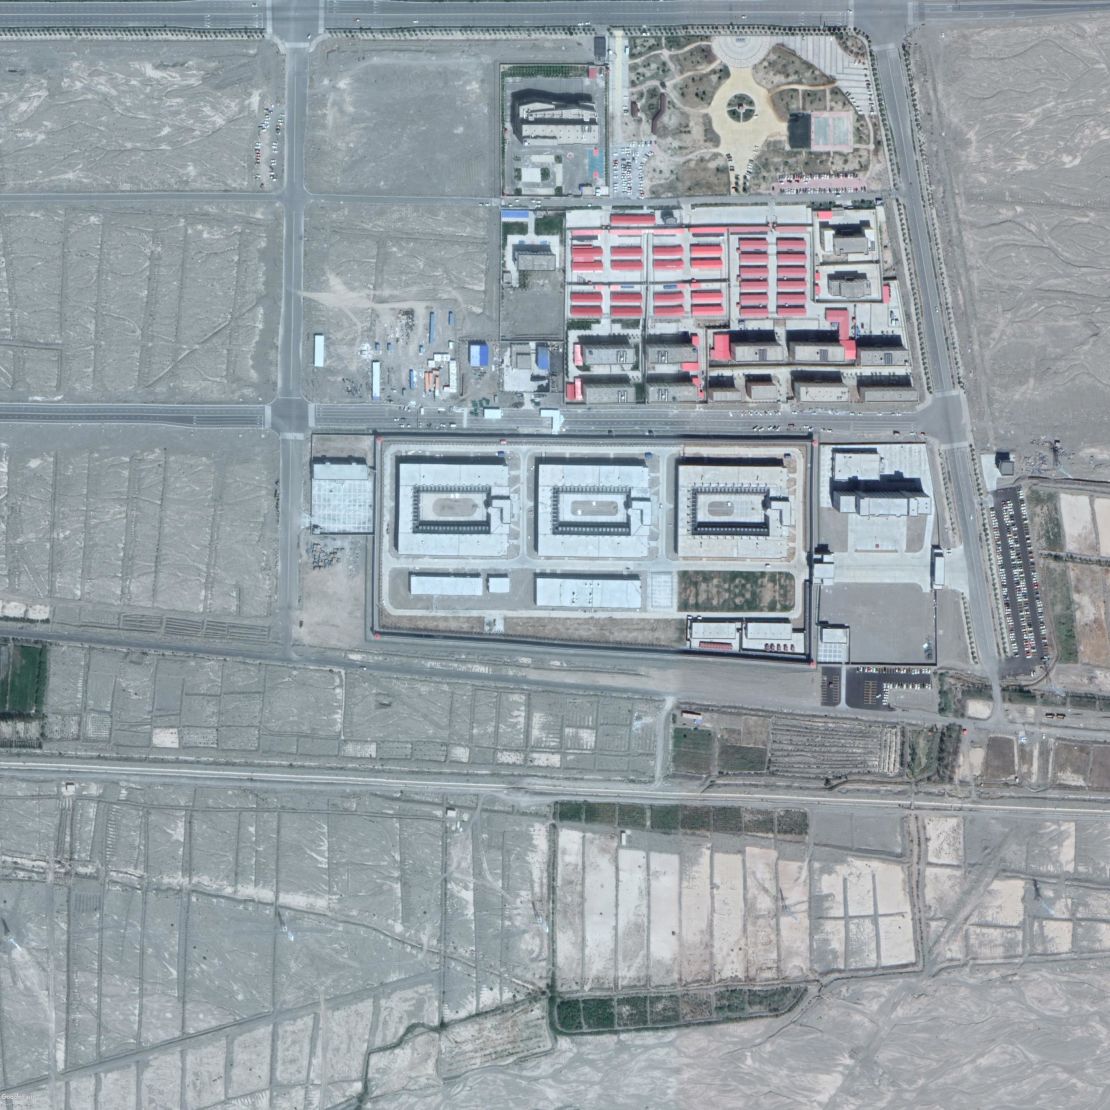 Alleged detention center on the outskirts of Kashgar, which CNN tried to enter but was turned away by guards.